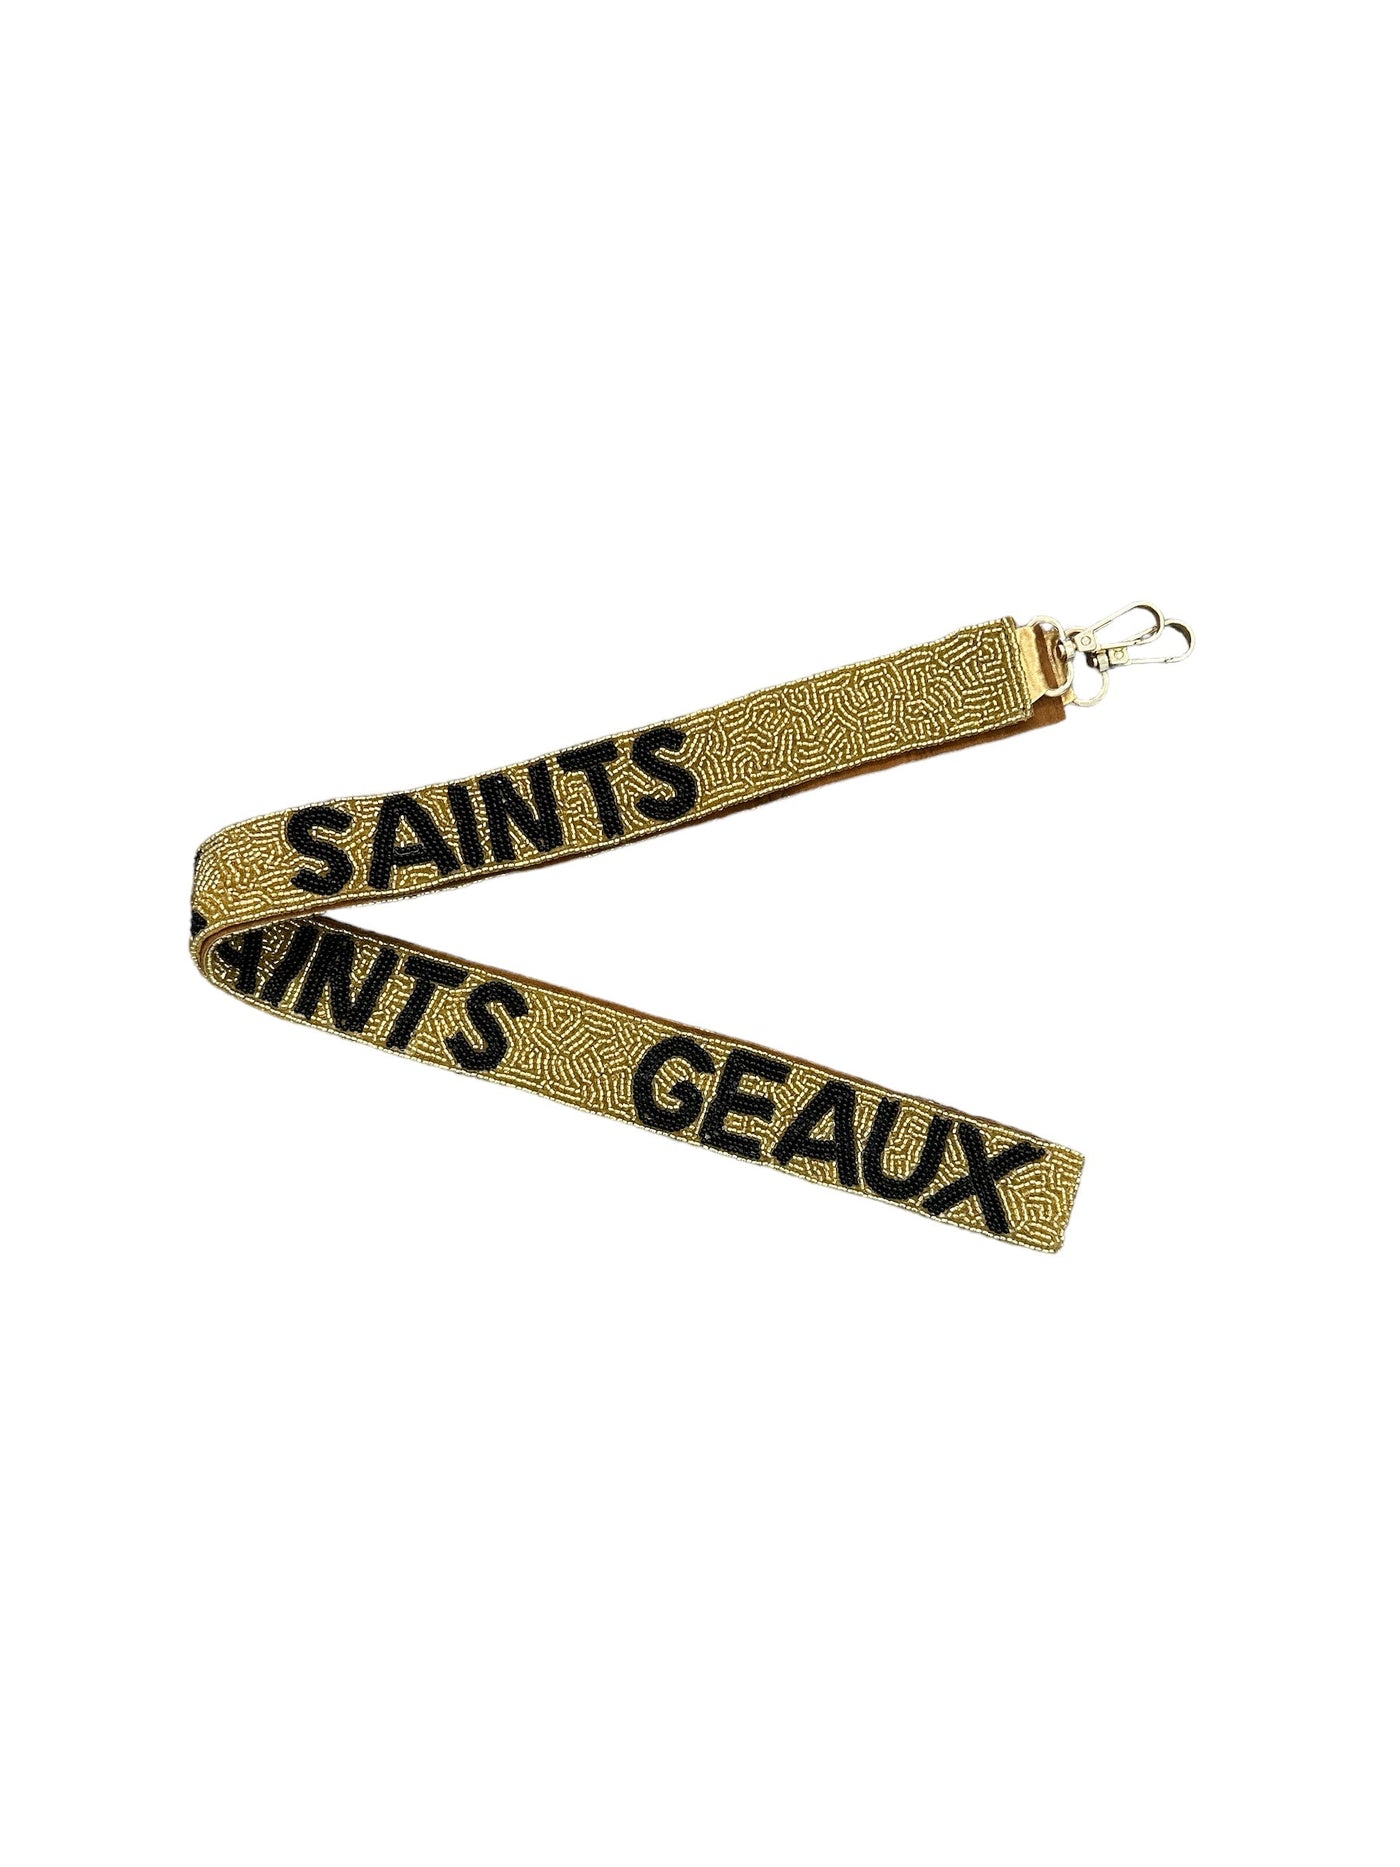 Seed Bead Strap - Geaux Saints - Gold with Black